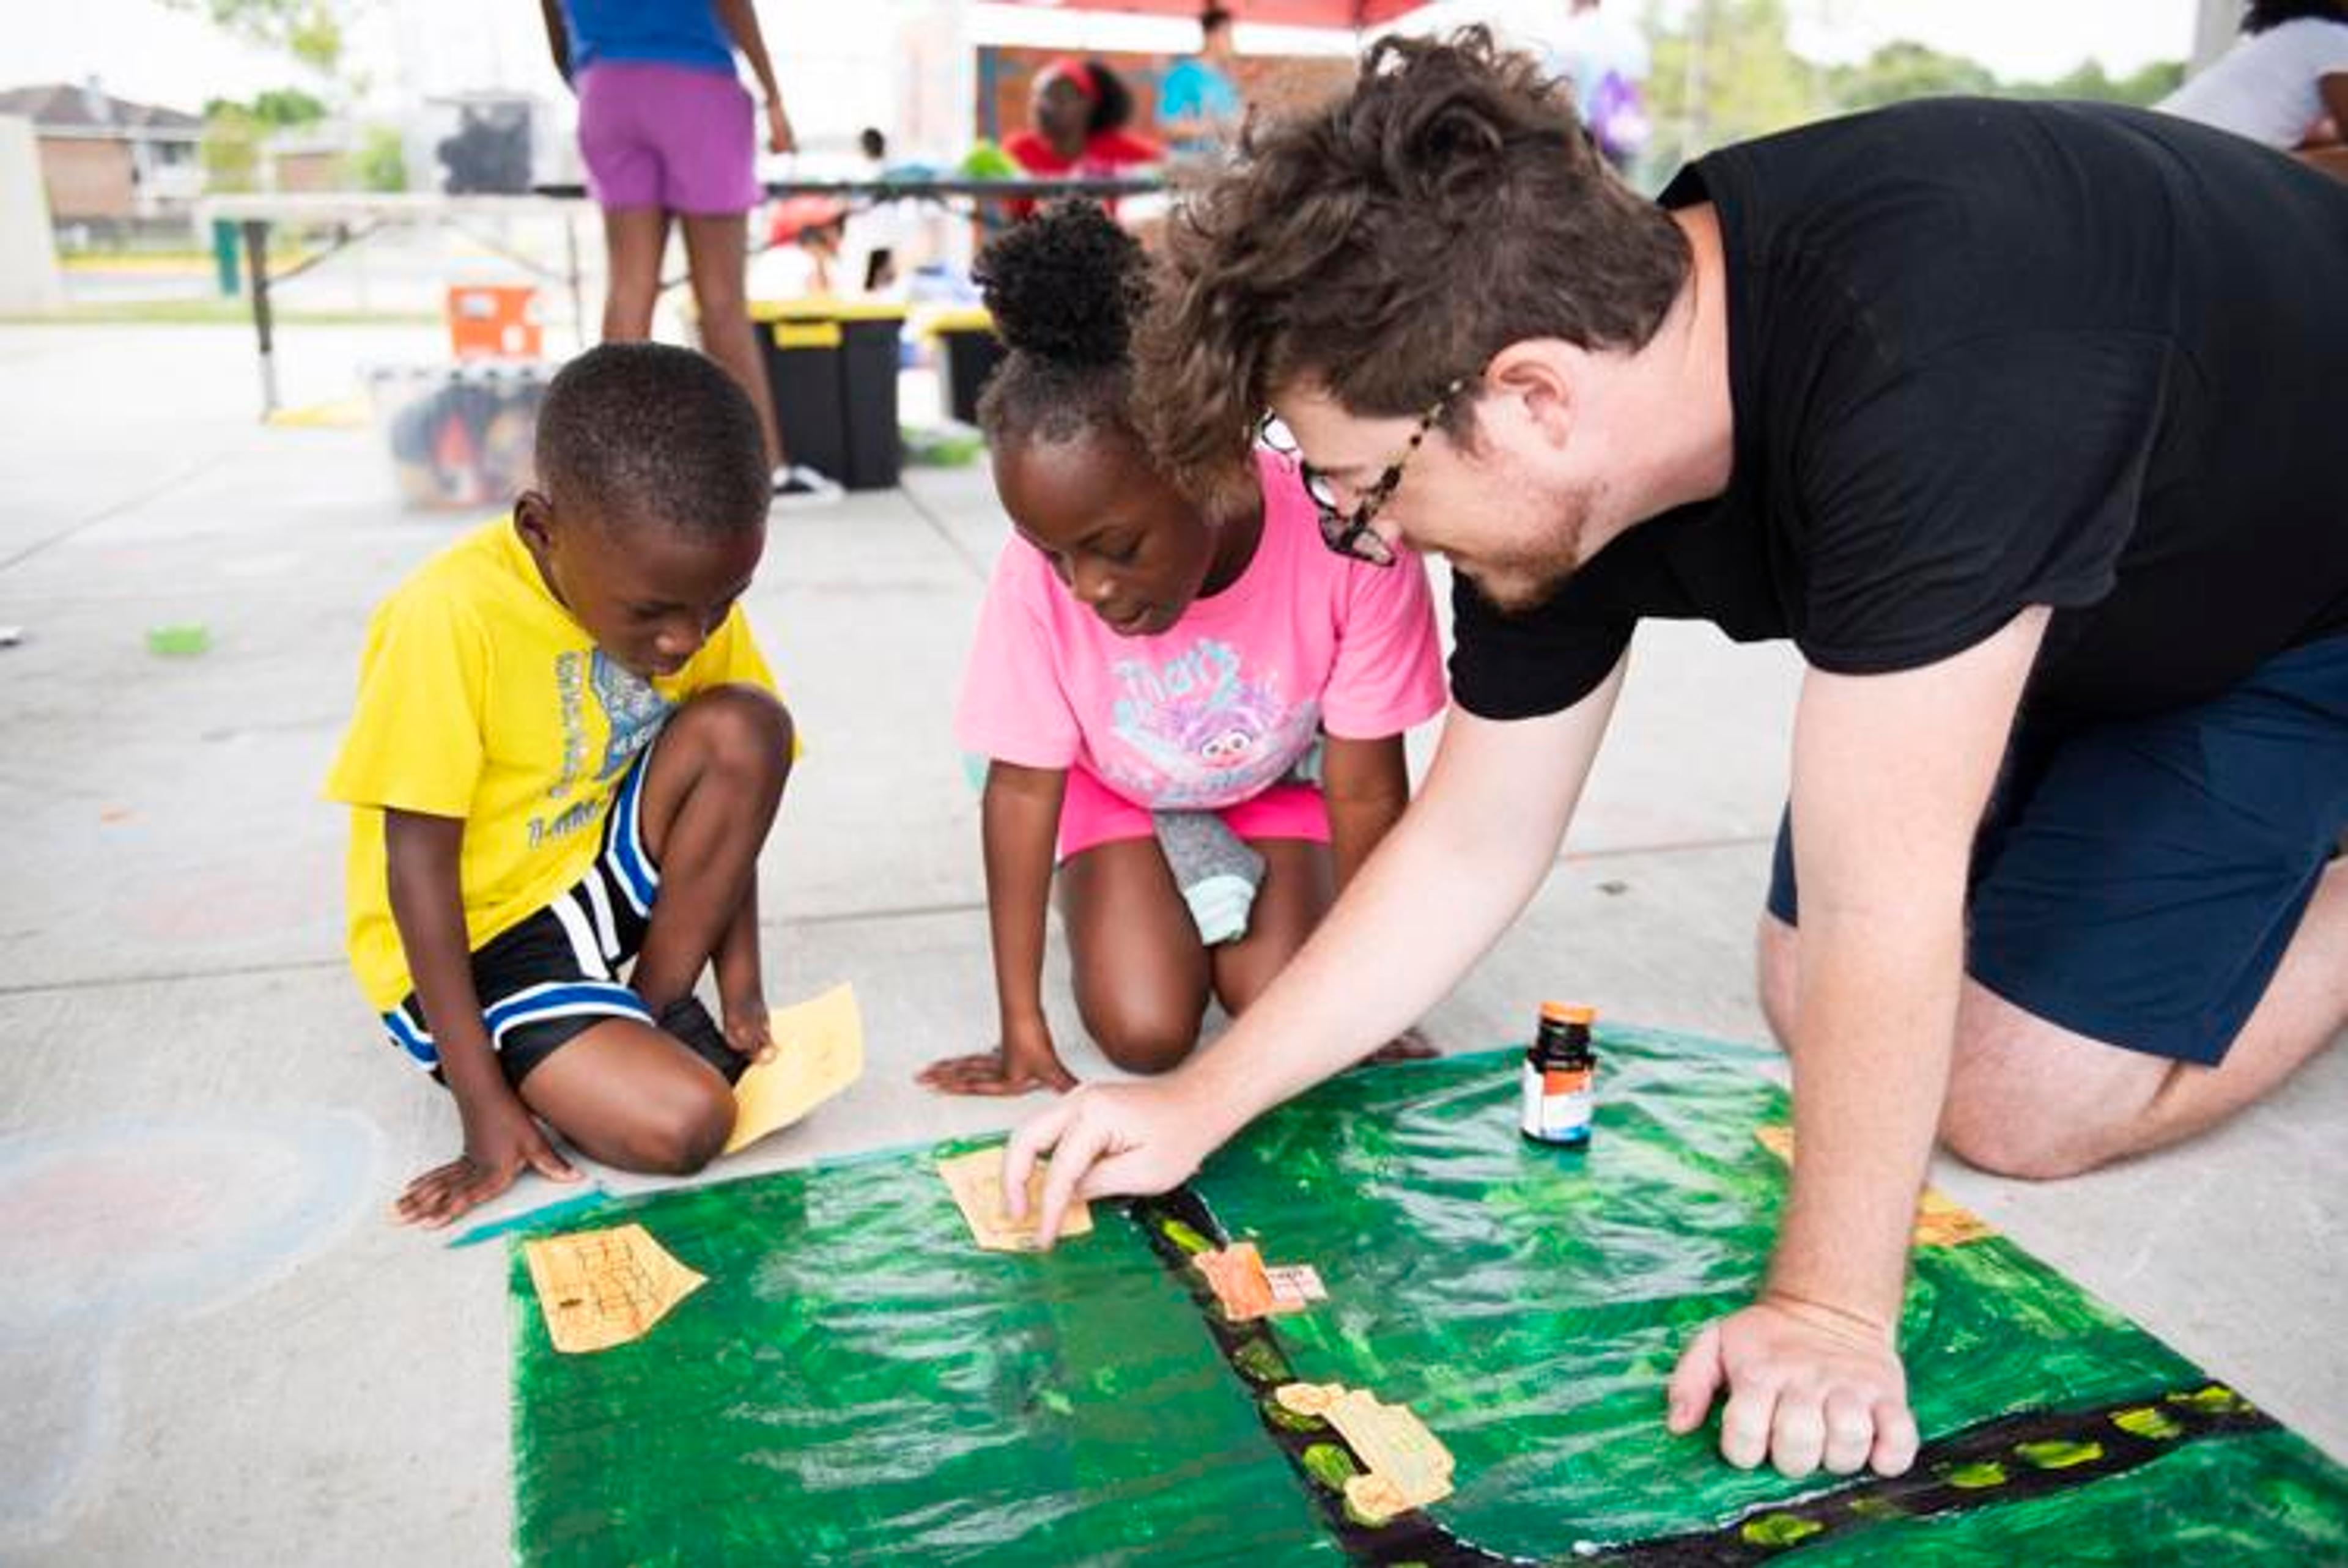 Grant Benoit, LSU Museum of Art educator and public programs manager, helps youngsters in the Neighborhood Arts Project, which will be held for free at various sites this summer.